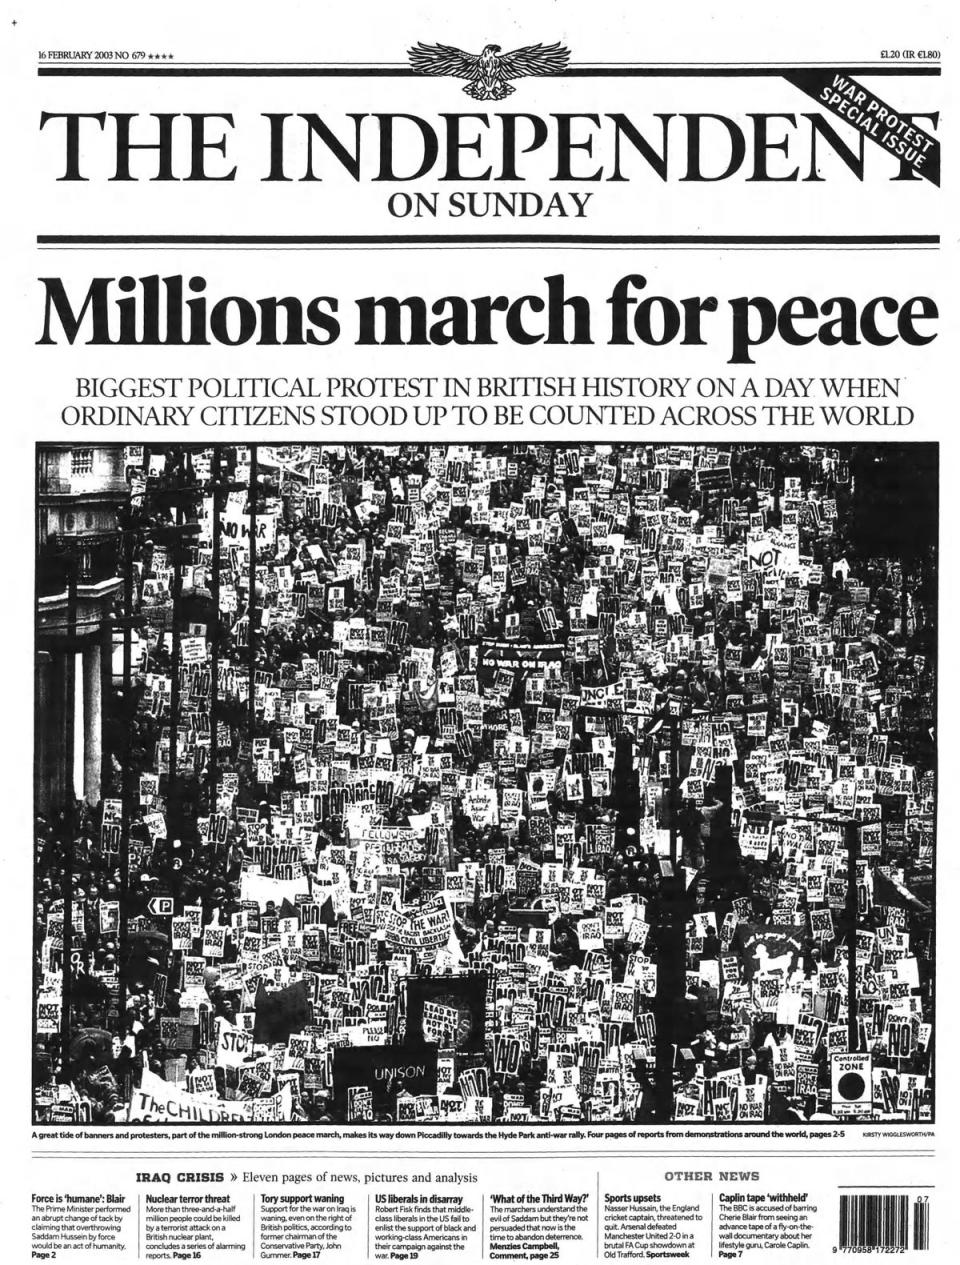 The Independent on Sunday front page on 16 February 2003 (The Independent)